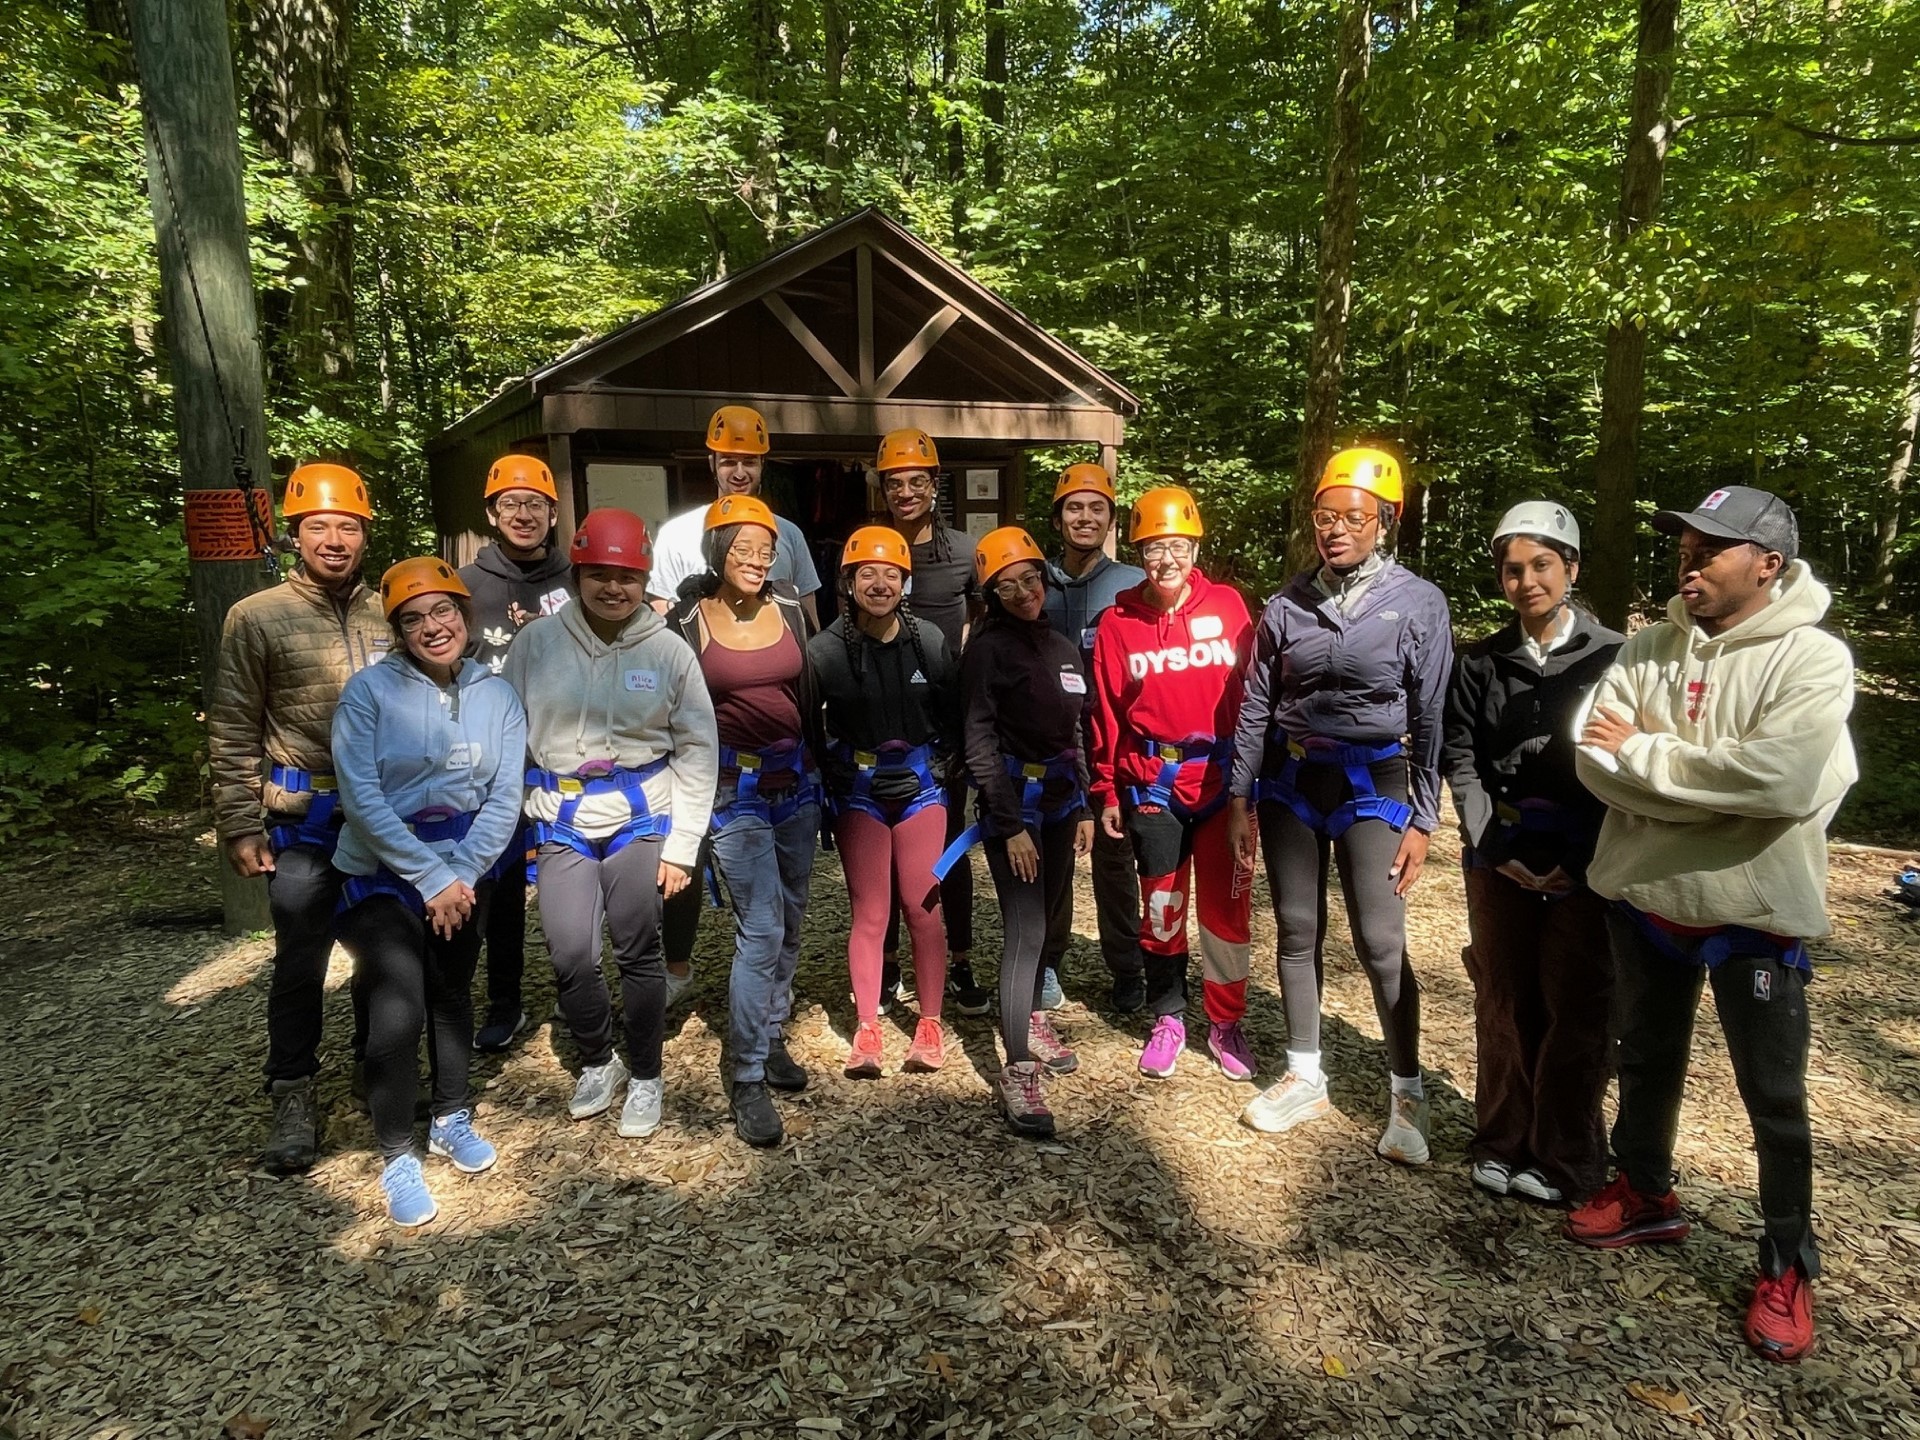 Group at the Hoffman Challenge Course